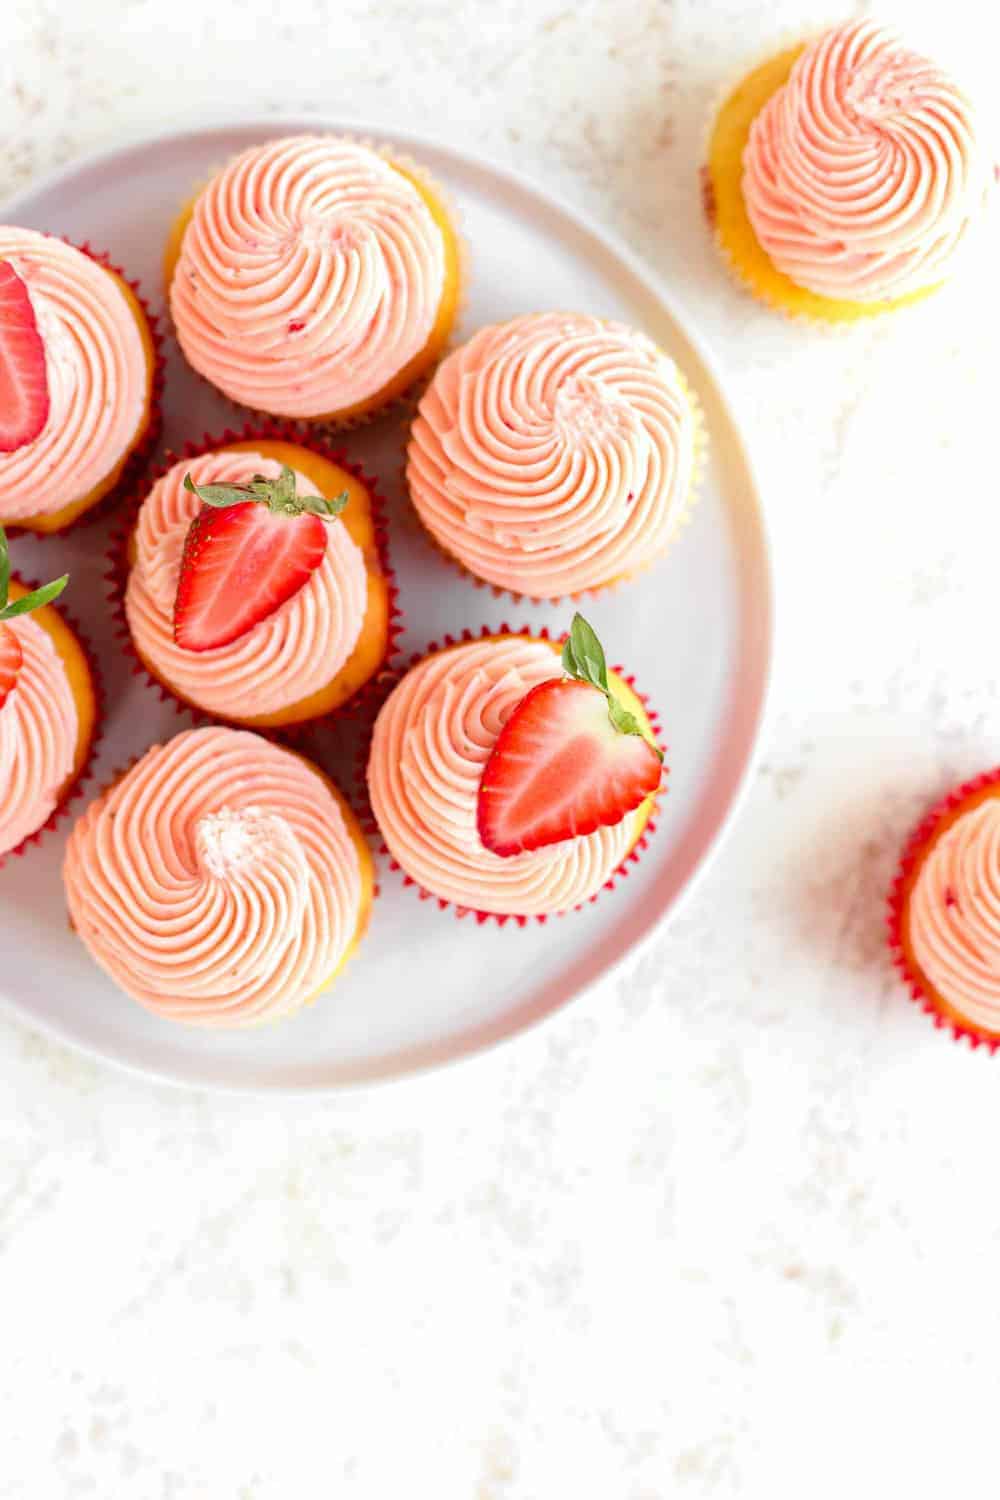 Overhead shot of easy strawberry cupcakes on a white plate, topped with halved strawberries